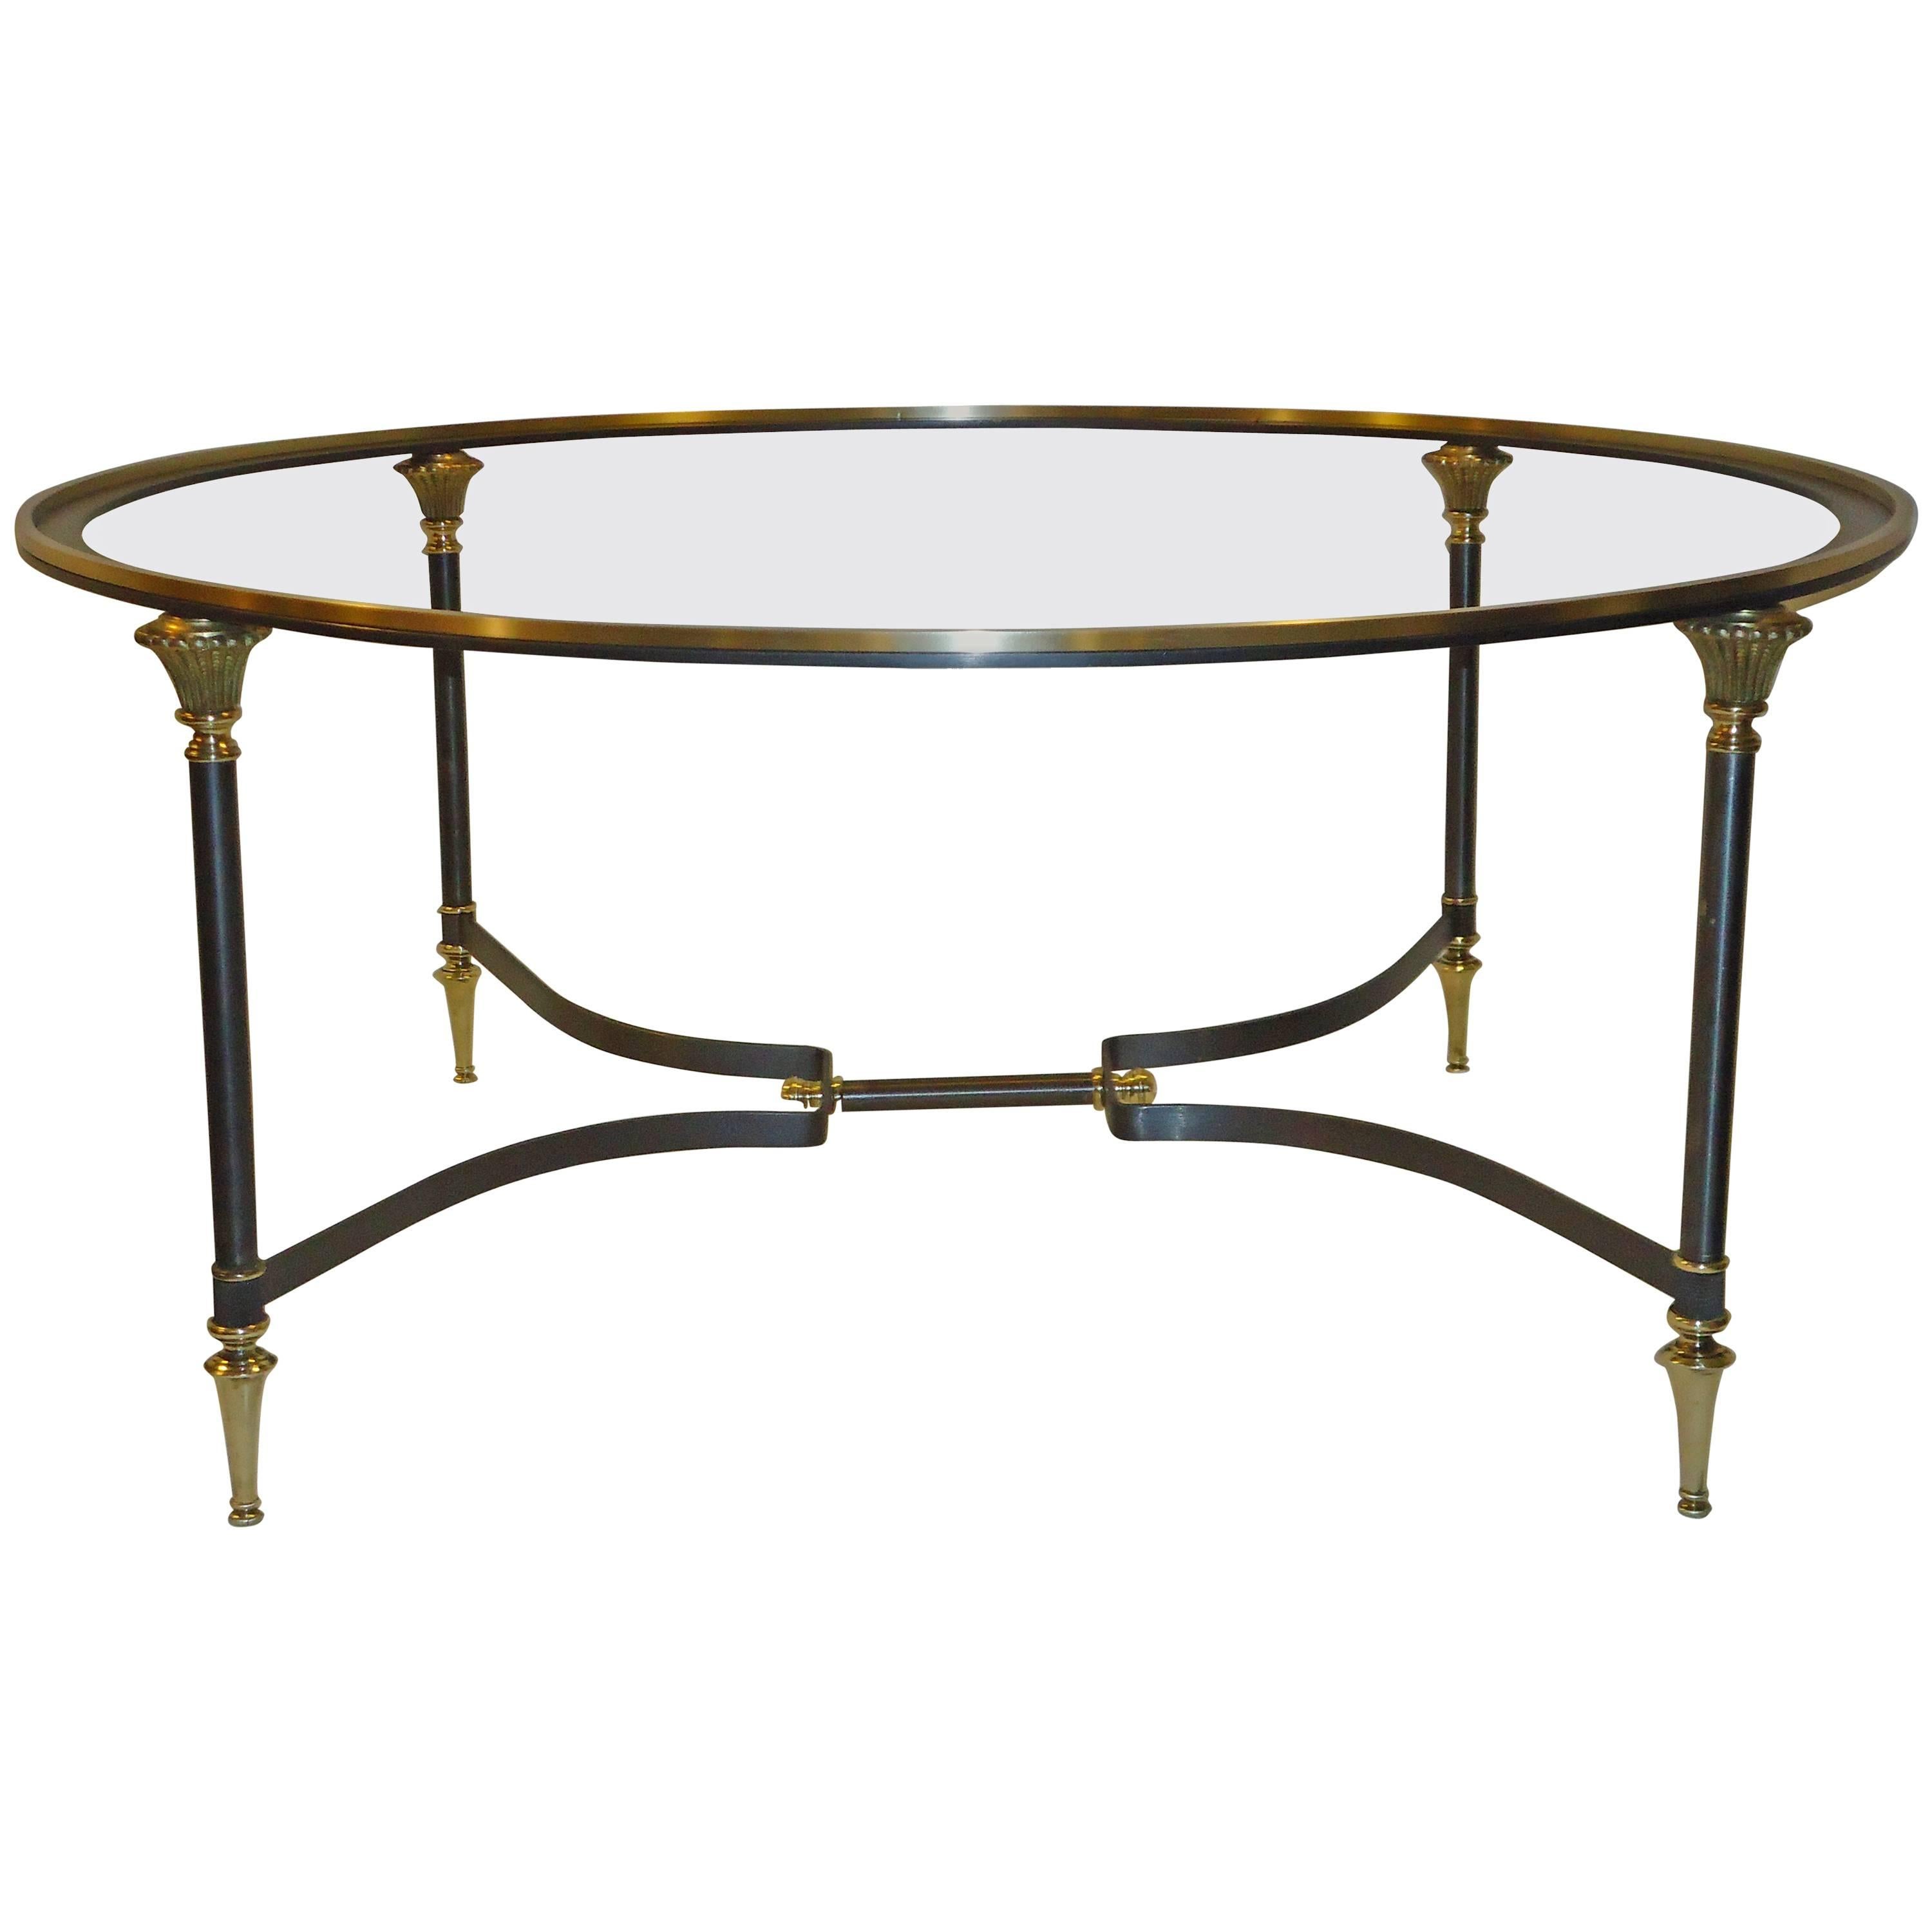 Neoclassical Coffee Table Italian Glass Insert Bronze and Brushed Steel  1950s